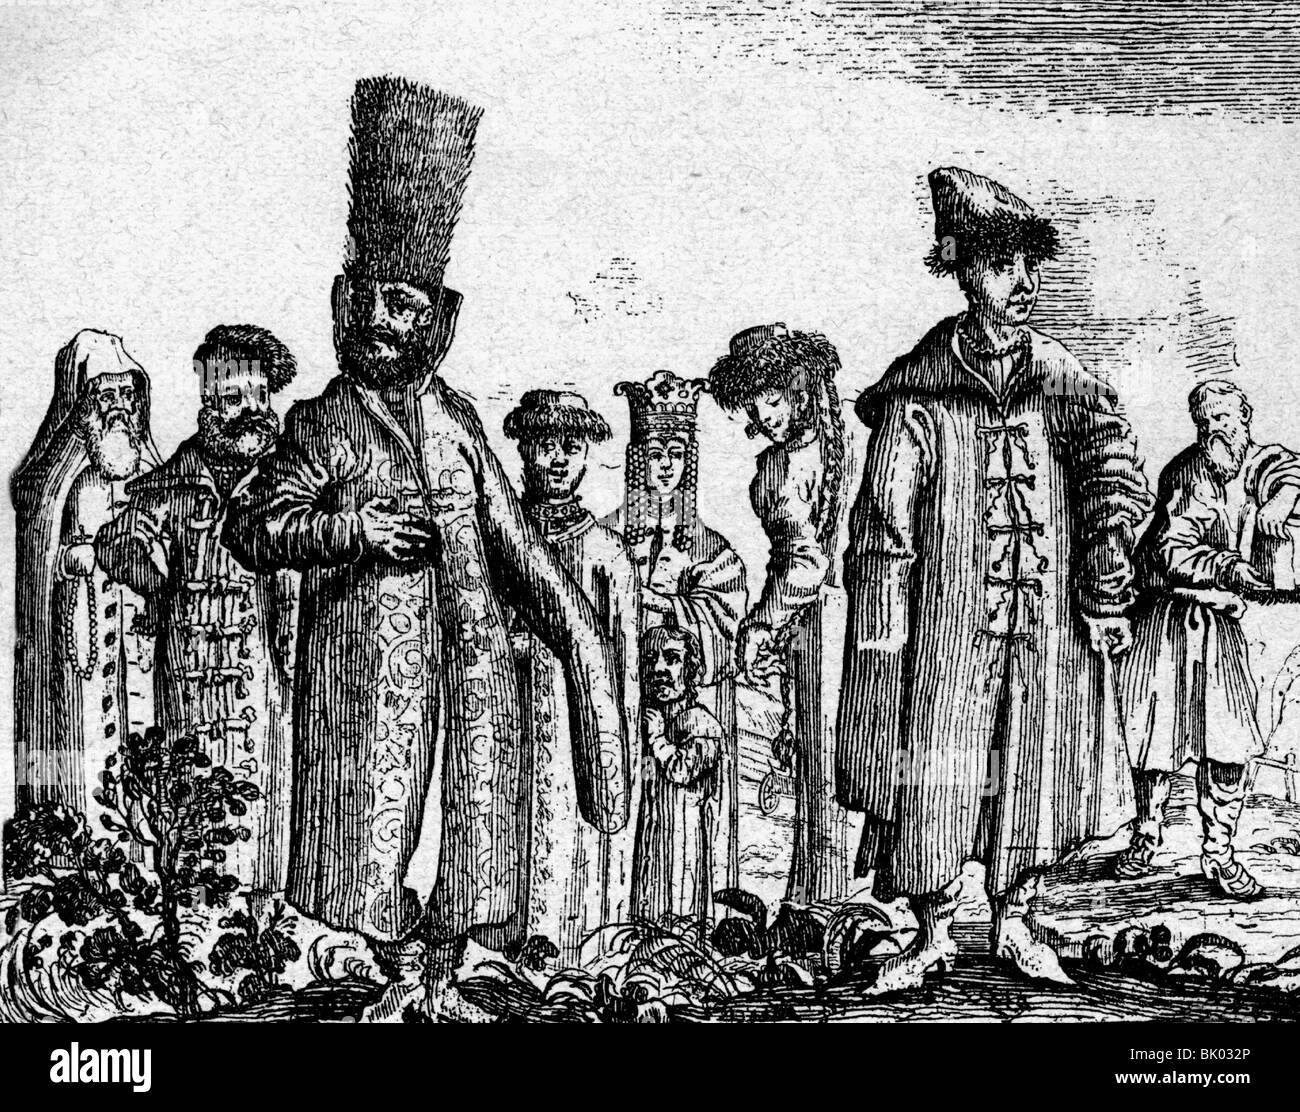 geography / travel, Russia, people, boyar, in Gala, copper engraving from 'Beschreibung einer Reise in Russland und Persien' (itinerary of Russia and Persia) by Adam Olearius, 1669, Stock Photo